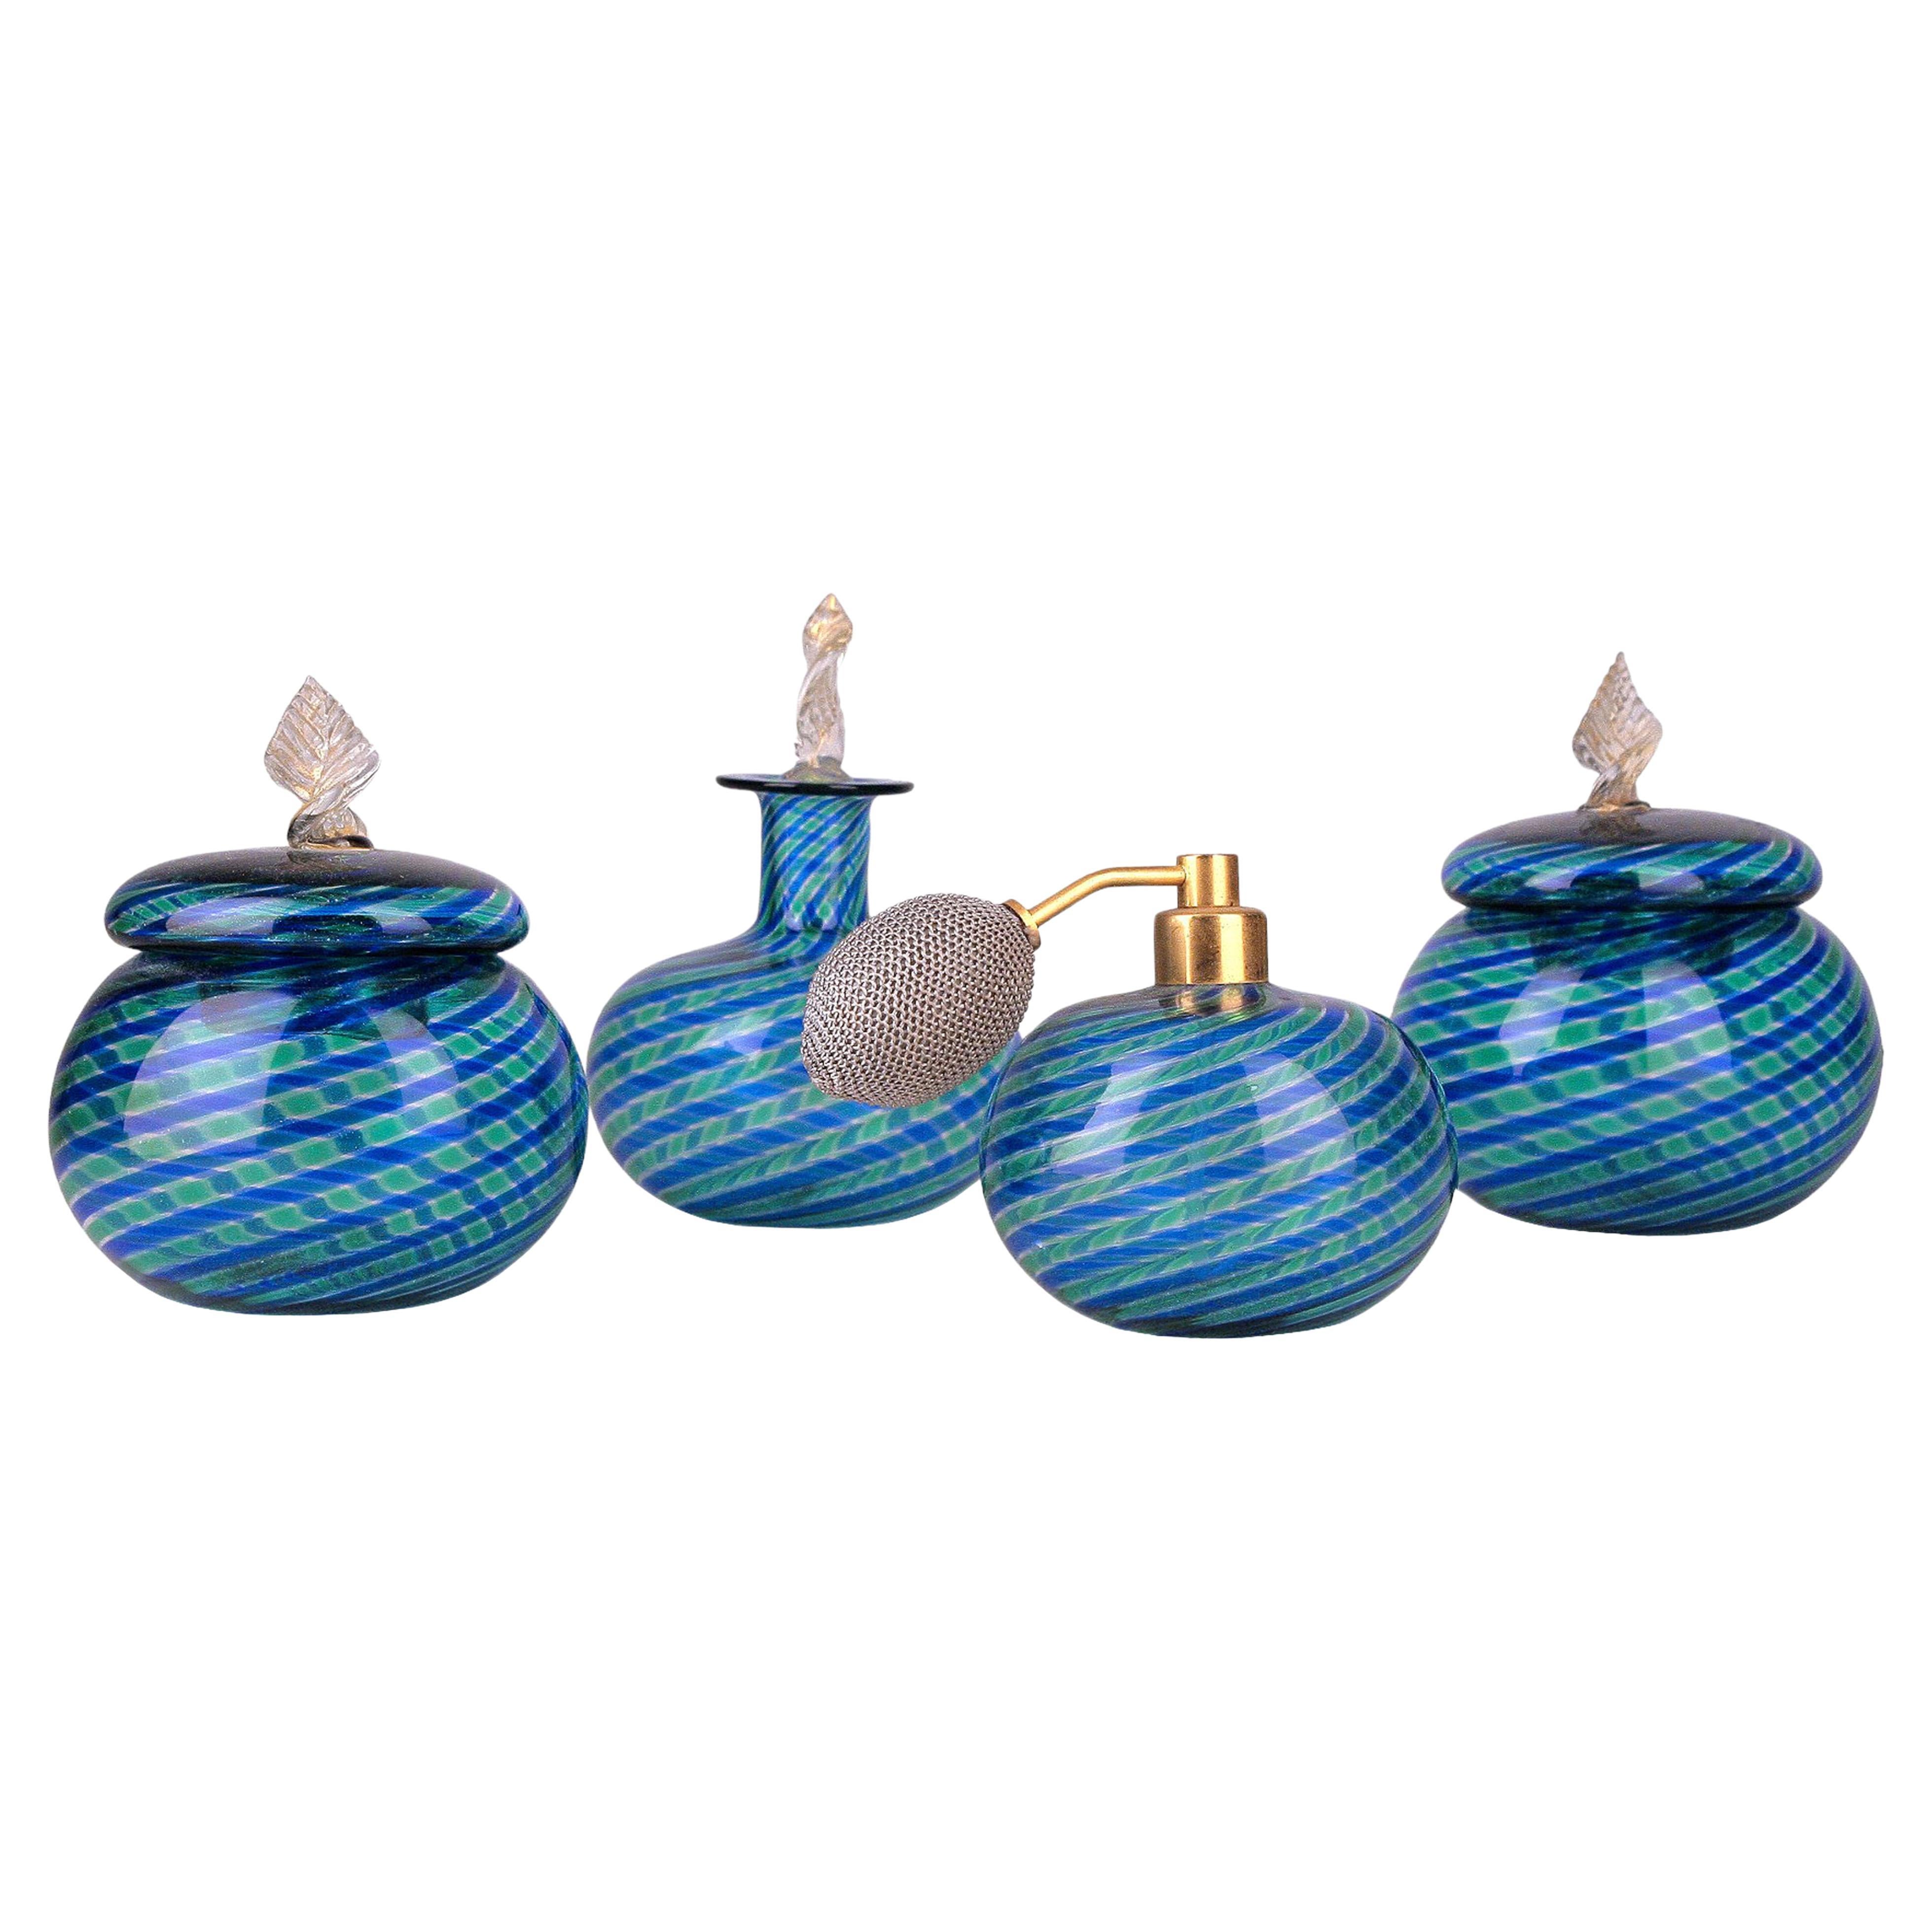 Murano 'Canne' Glass Vaporizer, Perfume Bottle and Powder Boxes Set by La Fenice For Sale